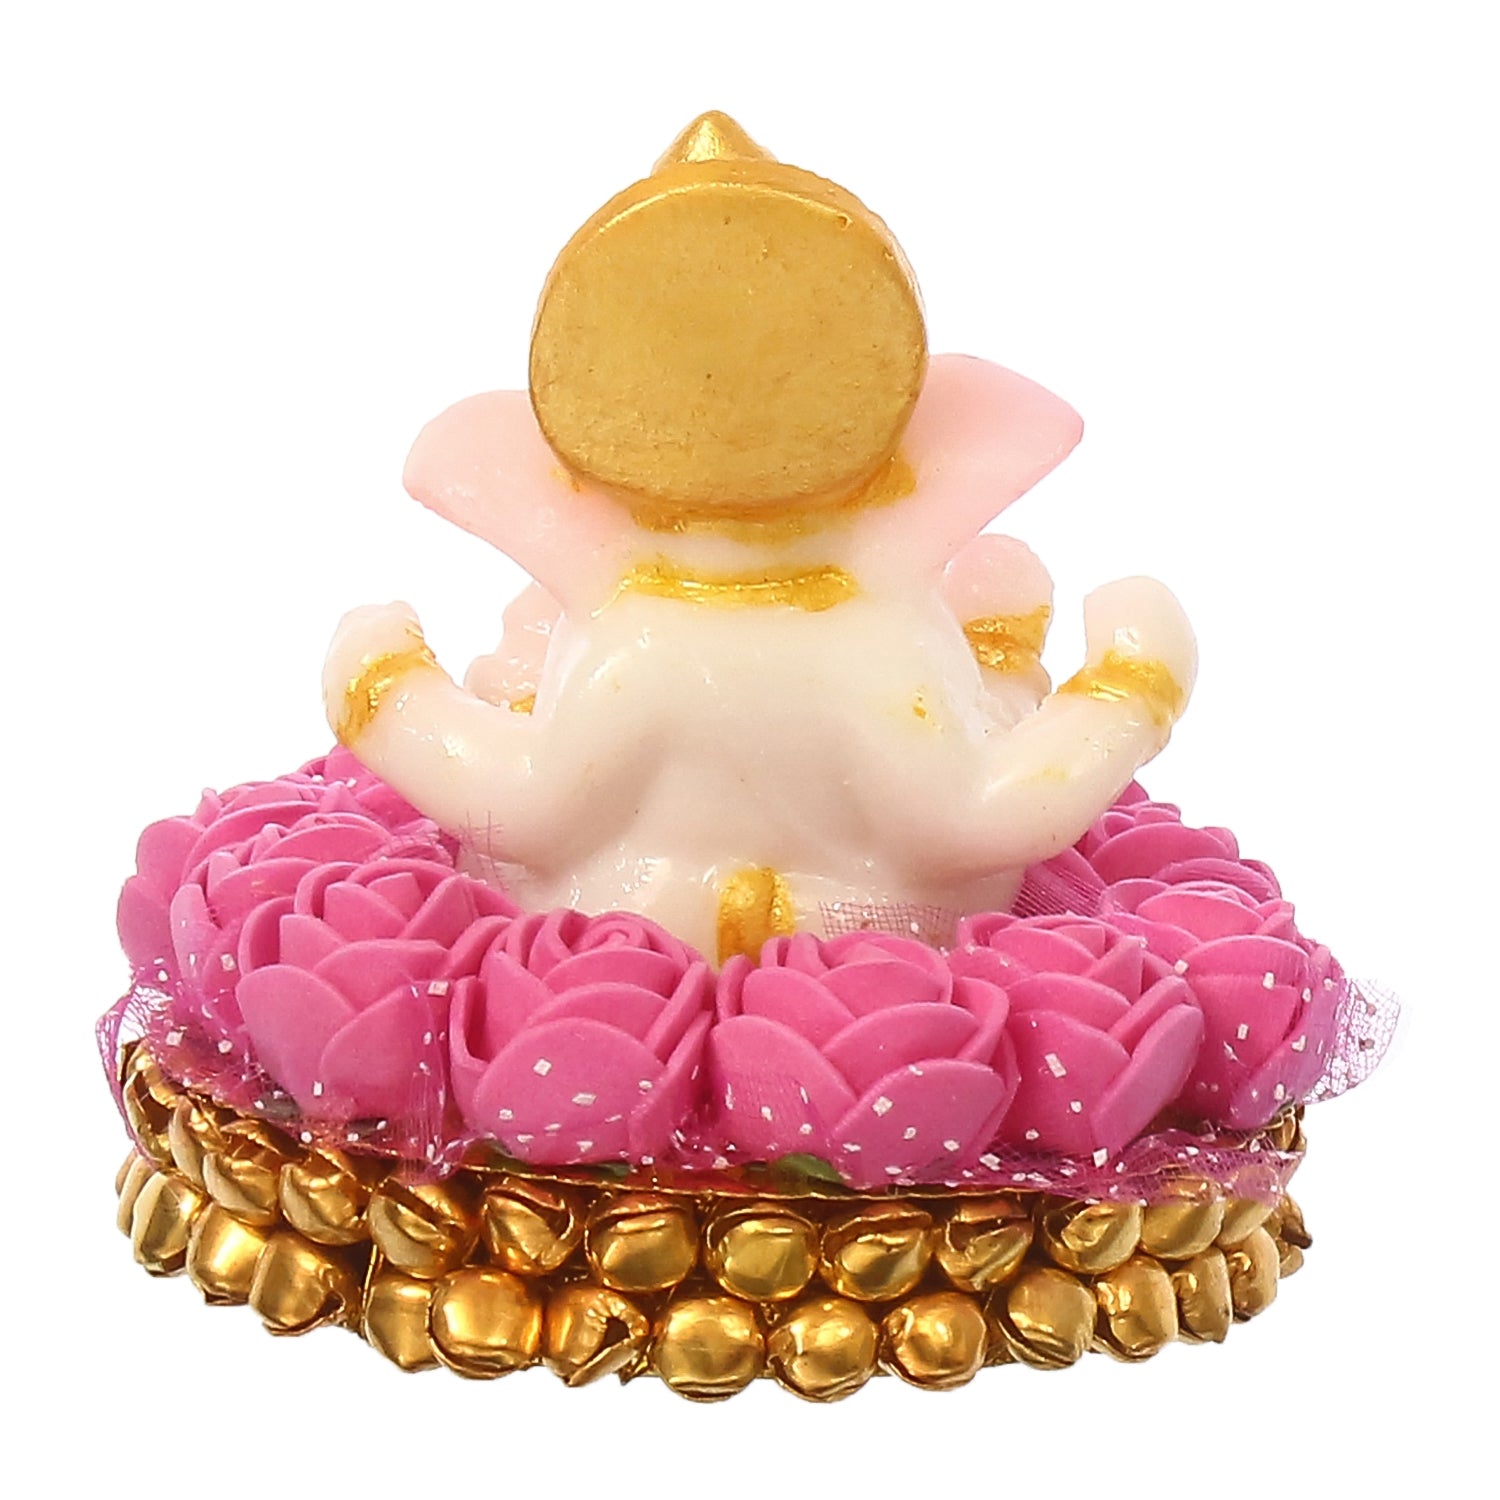 Polyresin Lord Ganesha Idol on Decorative Handcrafted Plate with Pink Flowers 6